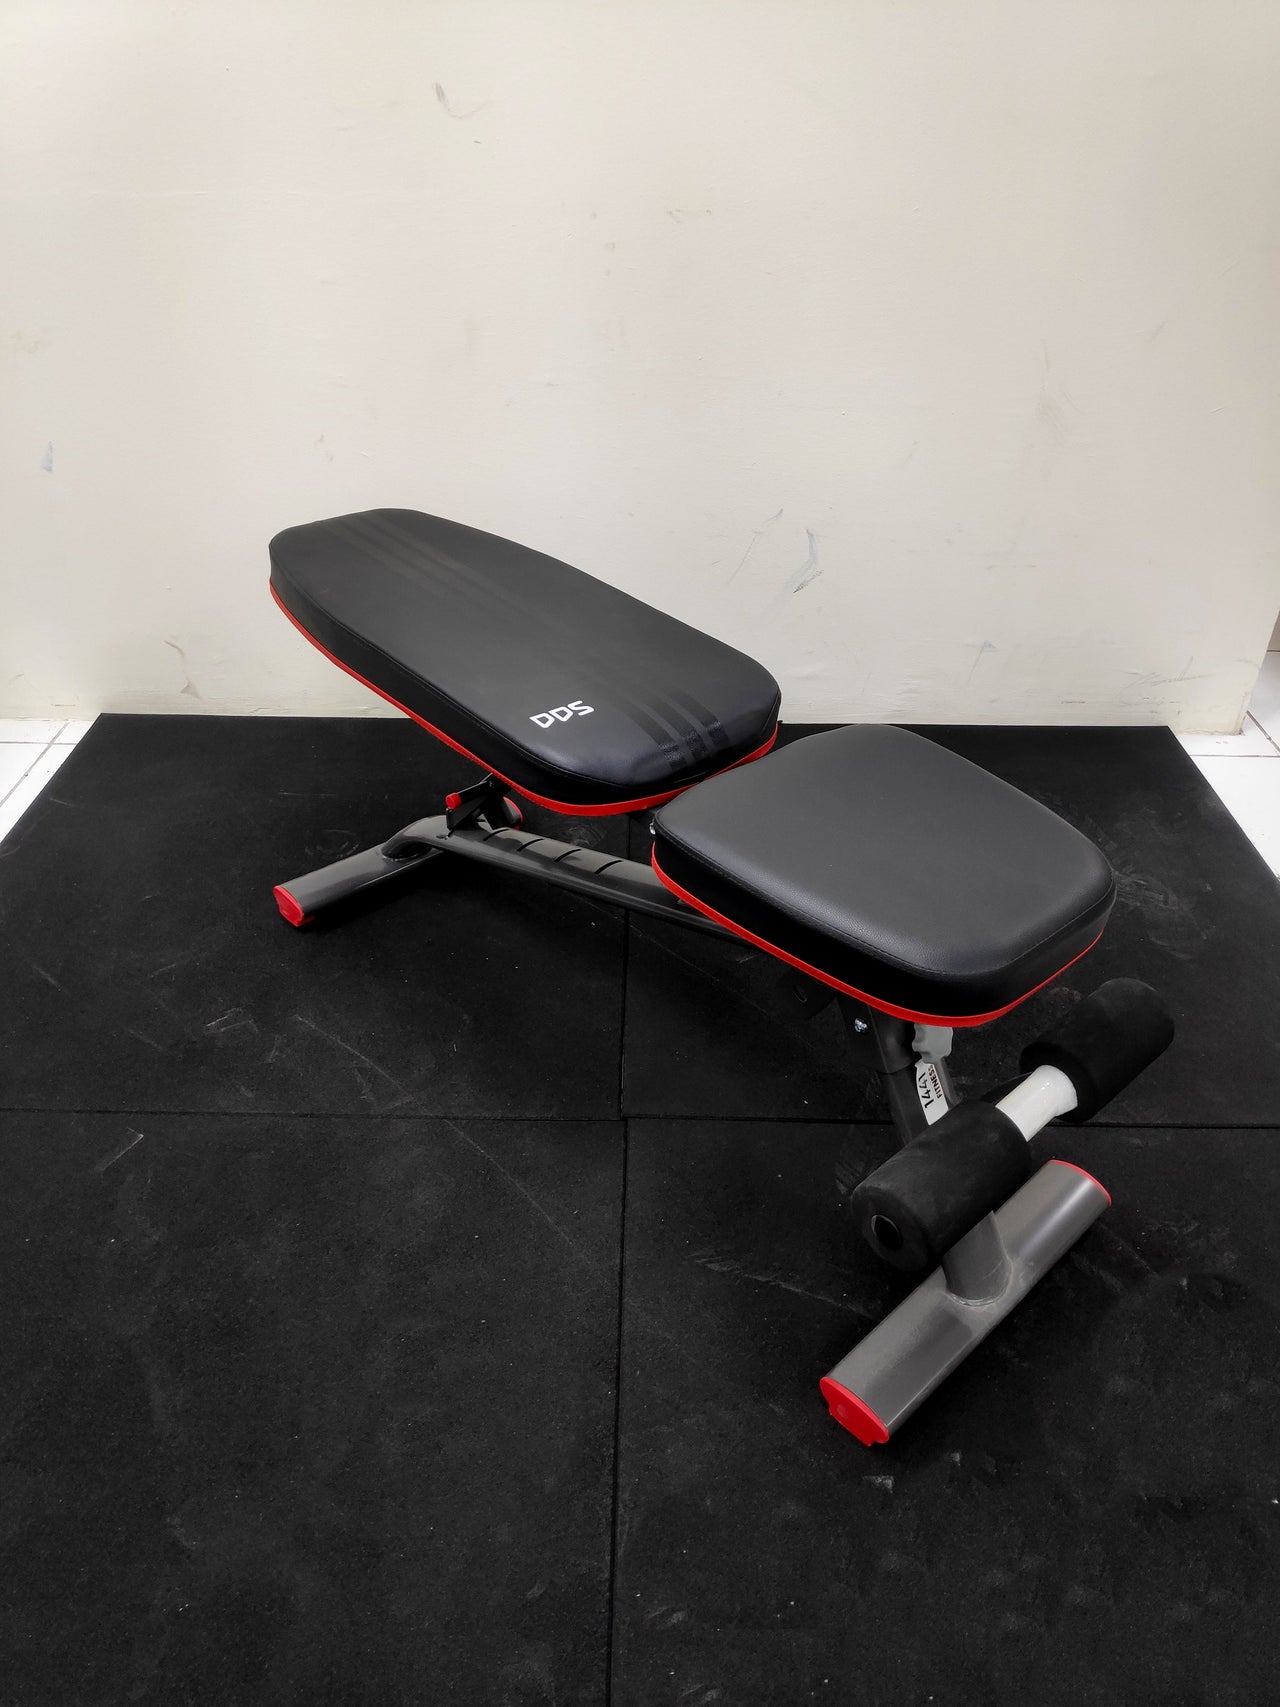 Home Weight Bench adjustable for flat, incline and decline positions